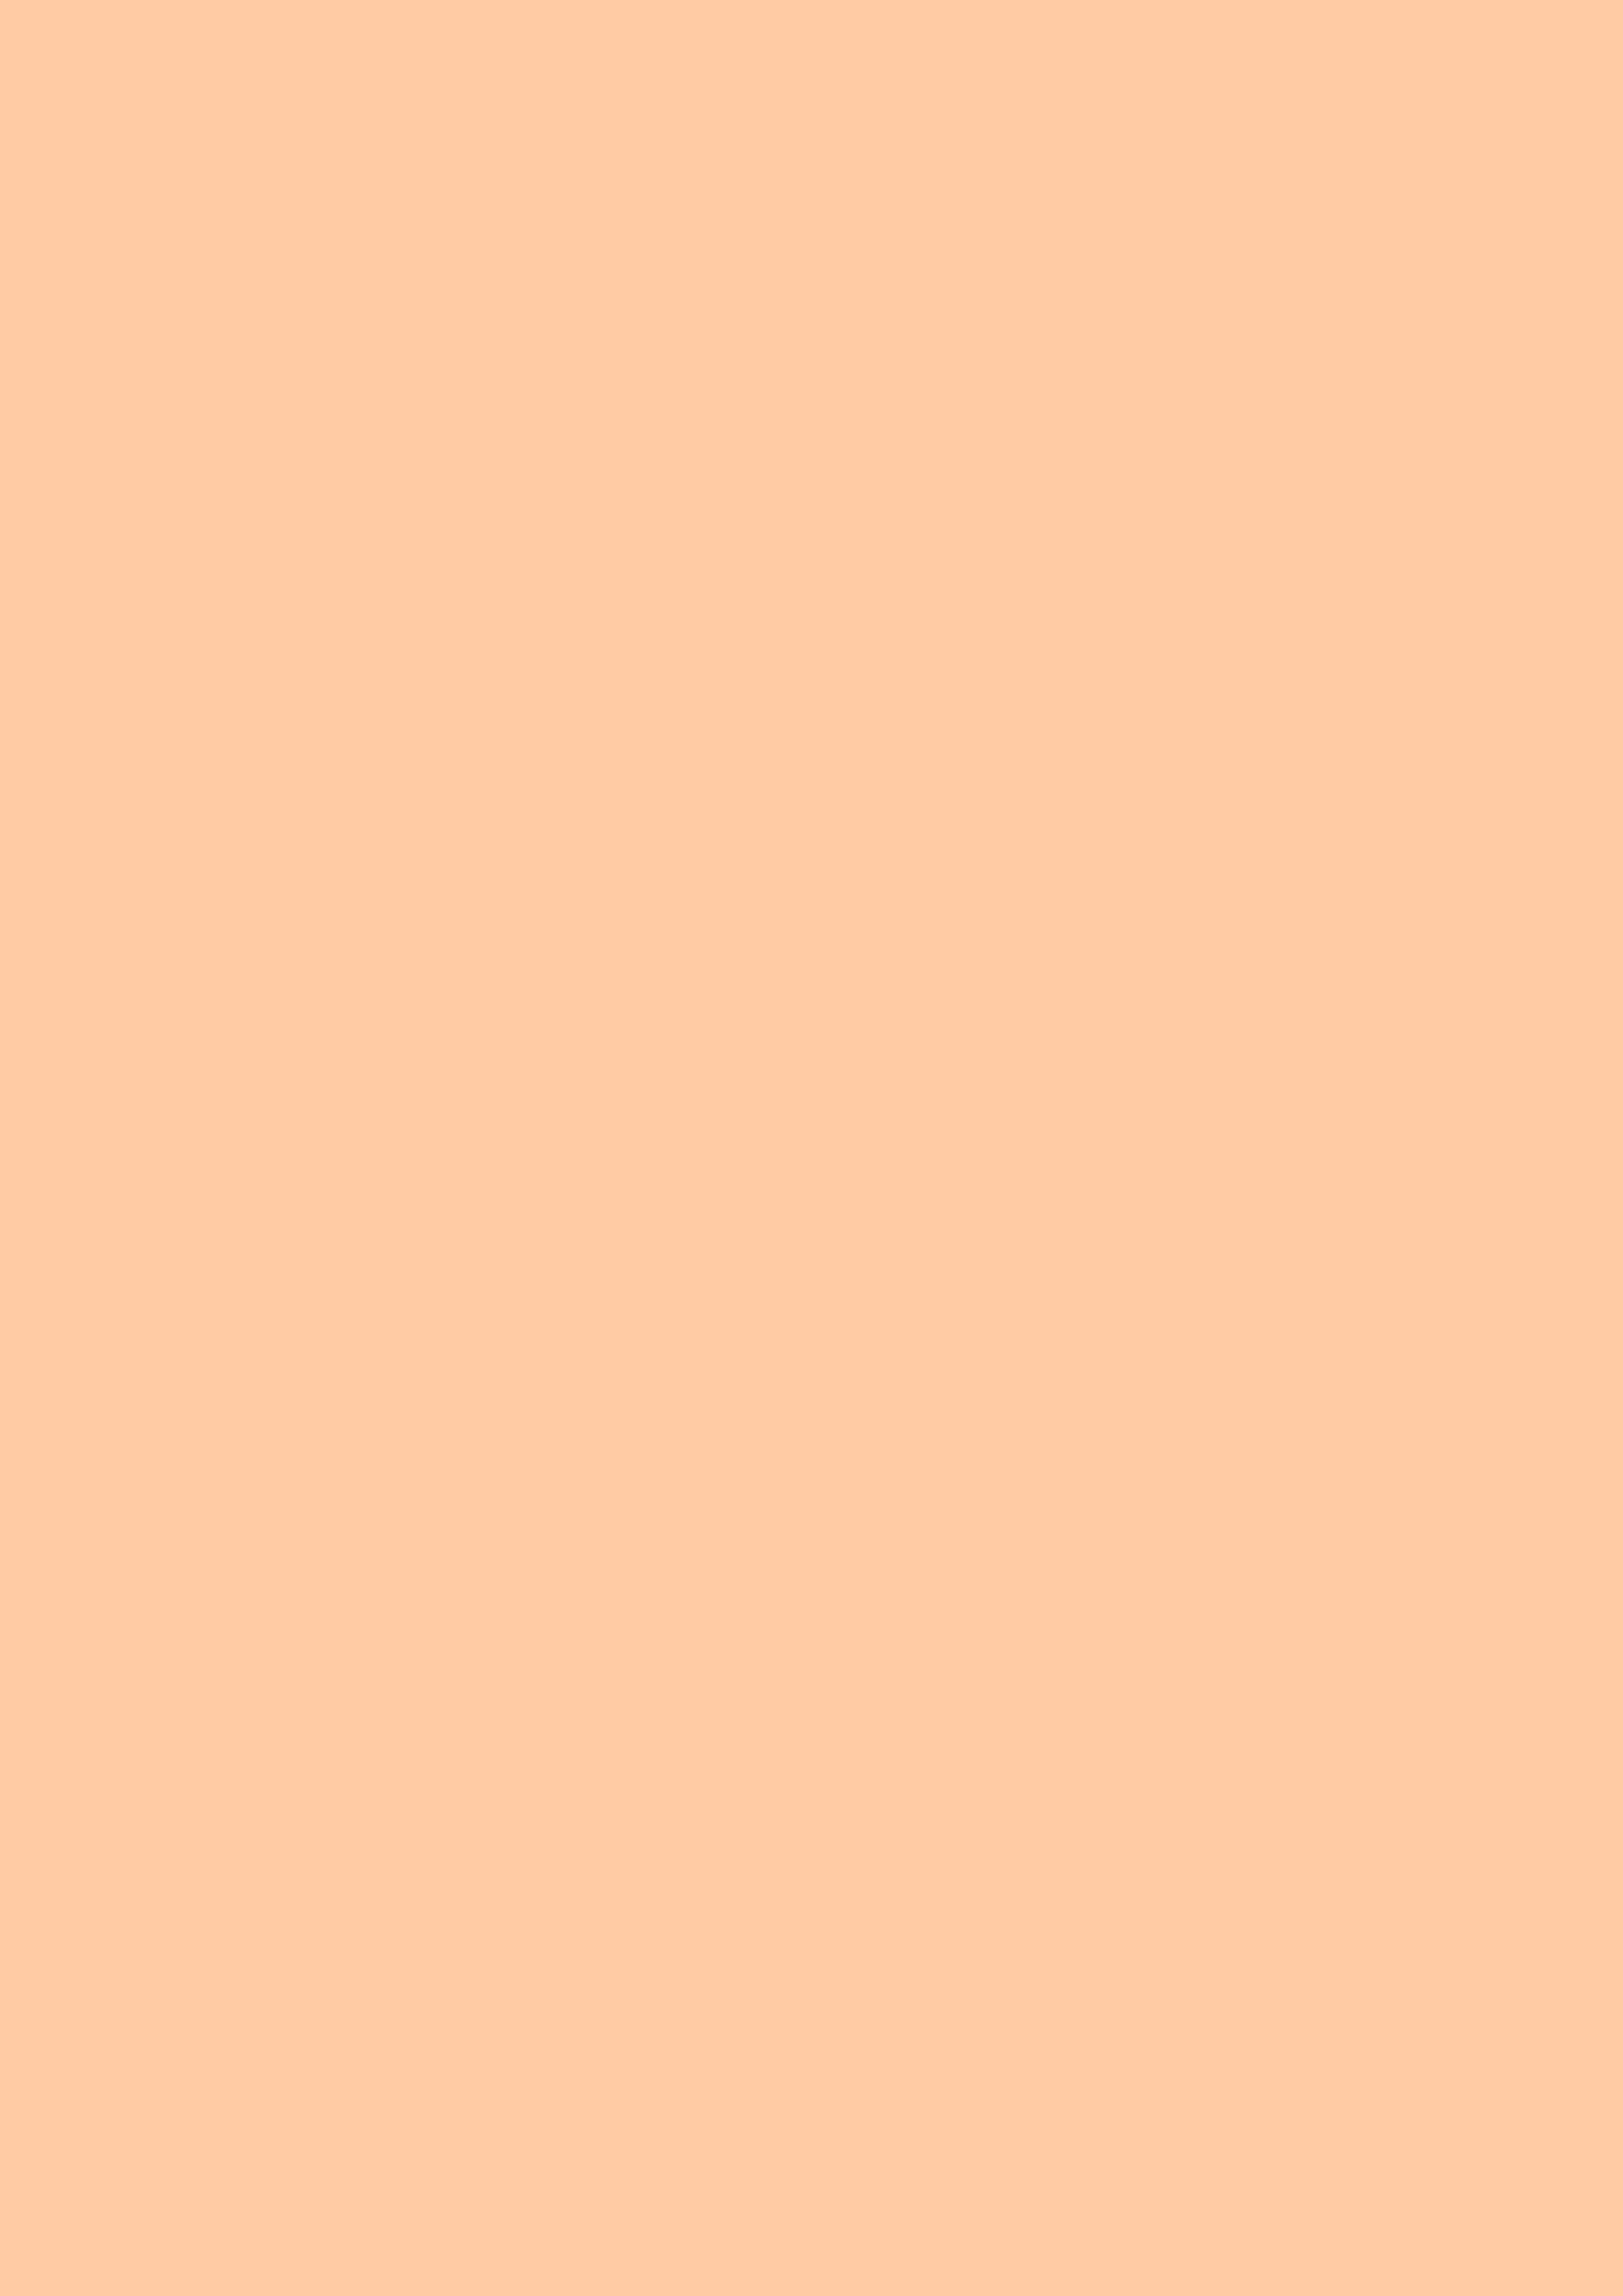 2480x3508 Deep Peach Solid Color Background